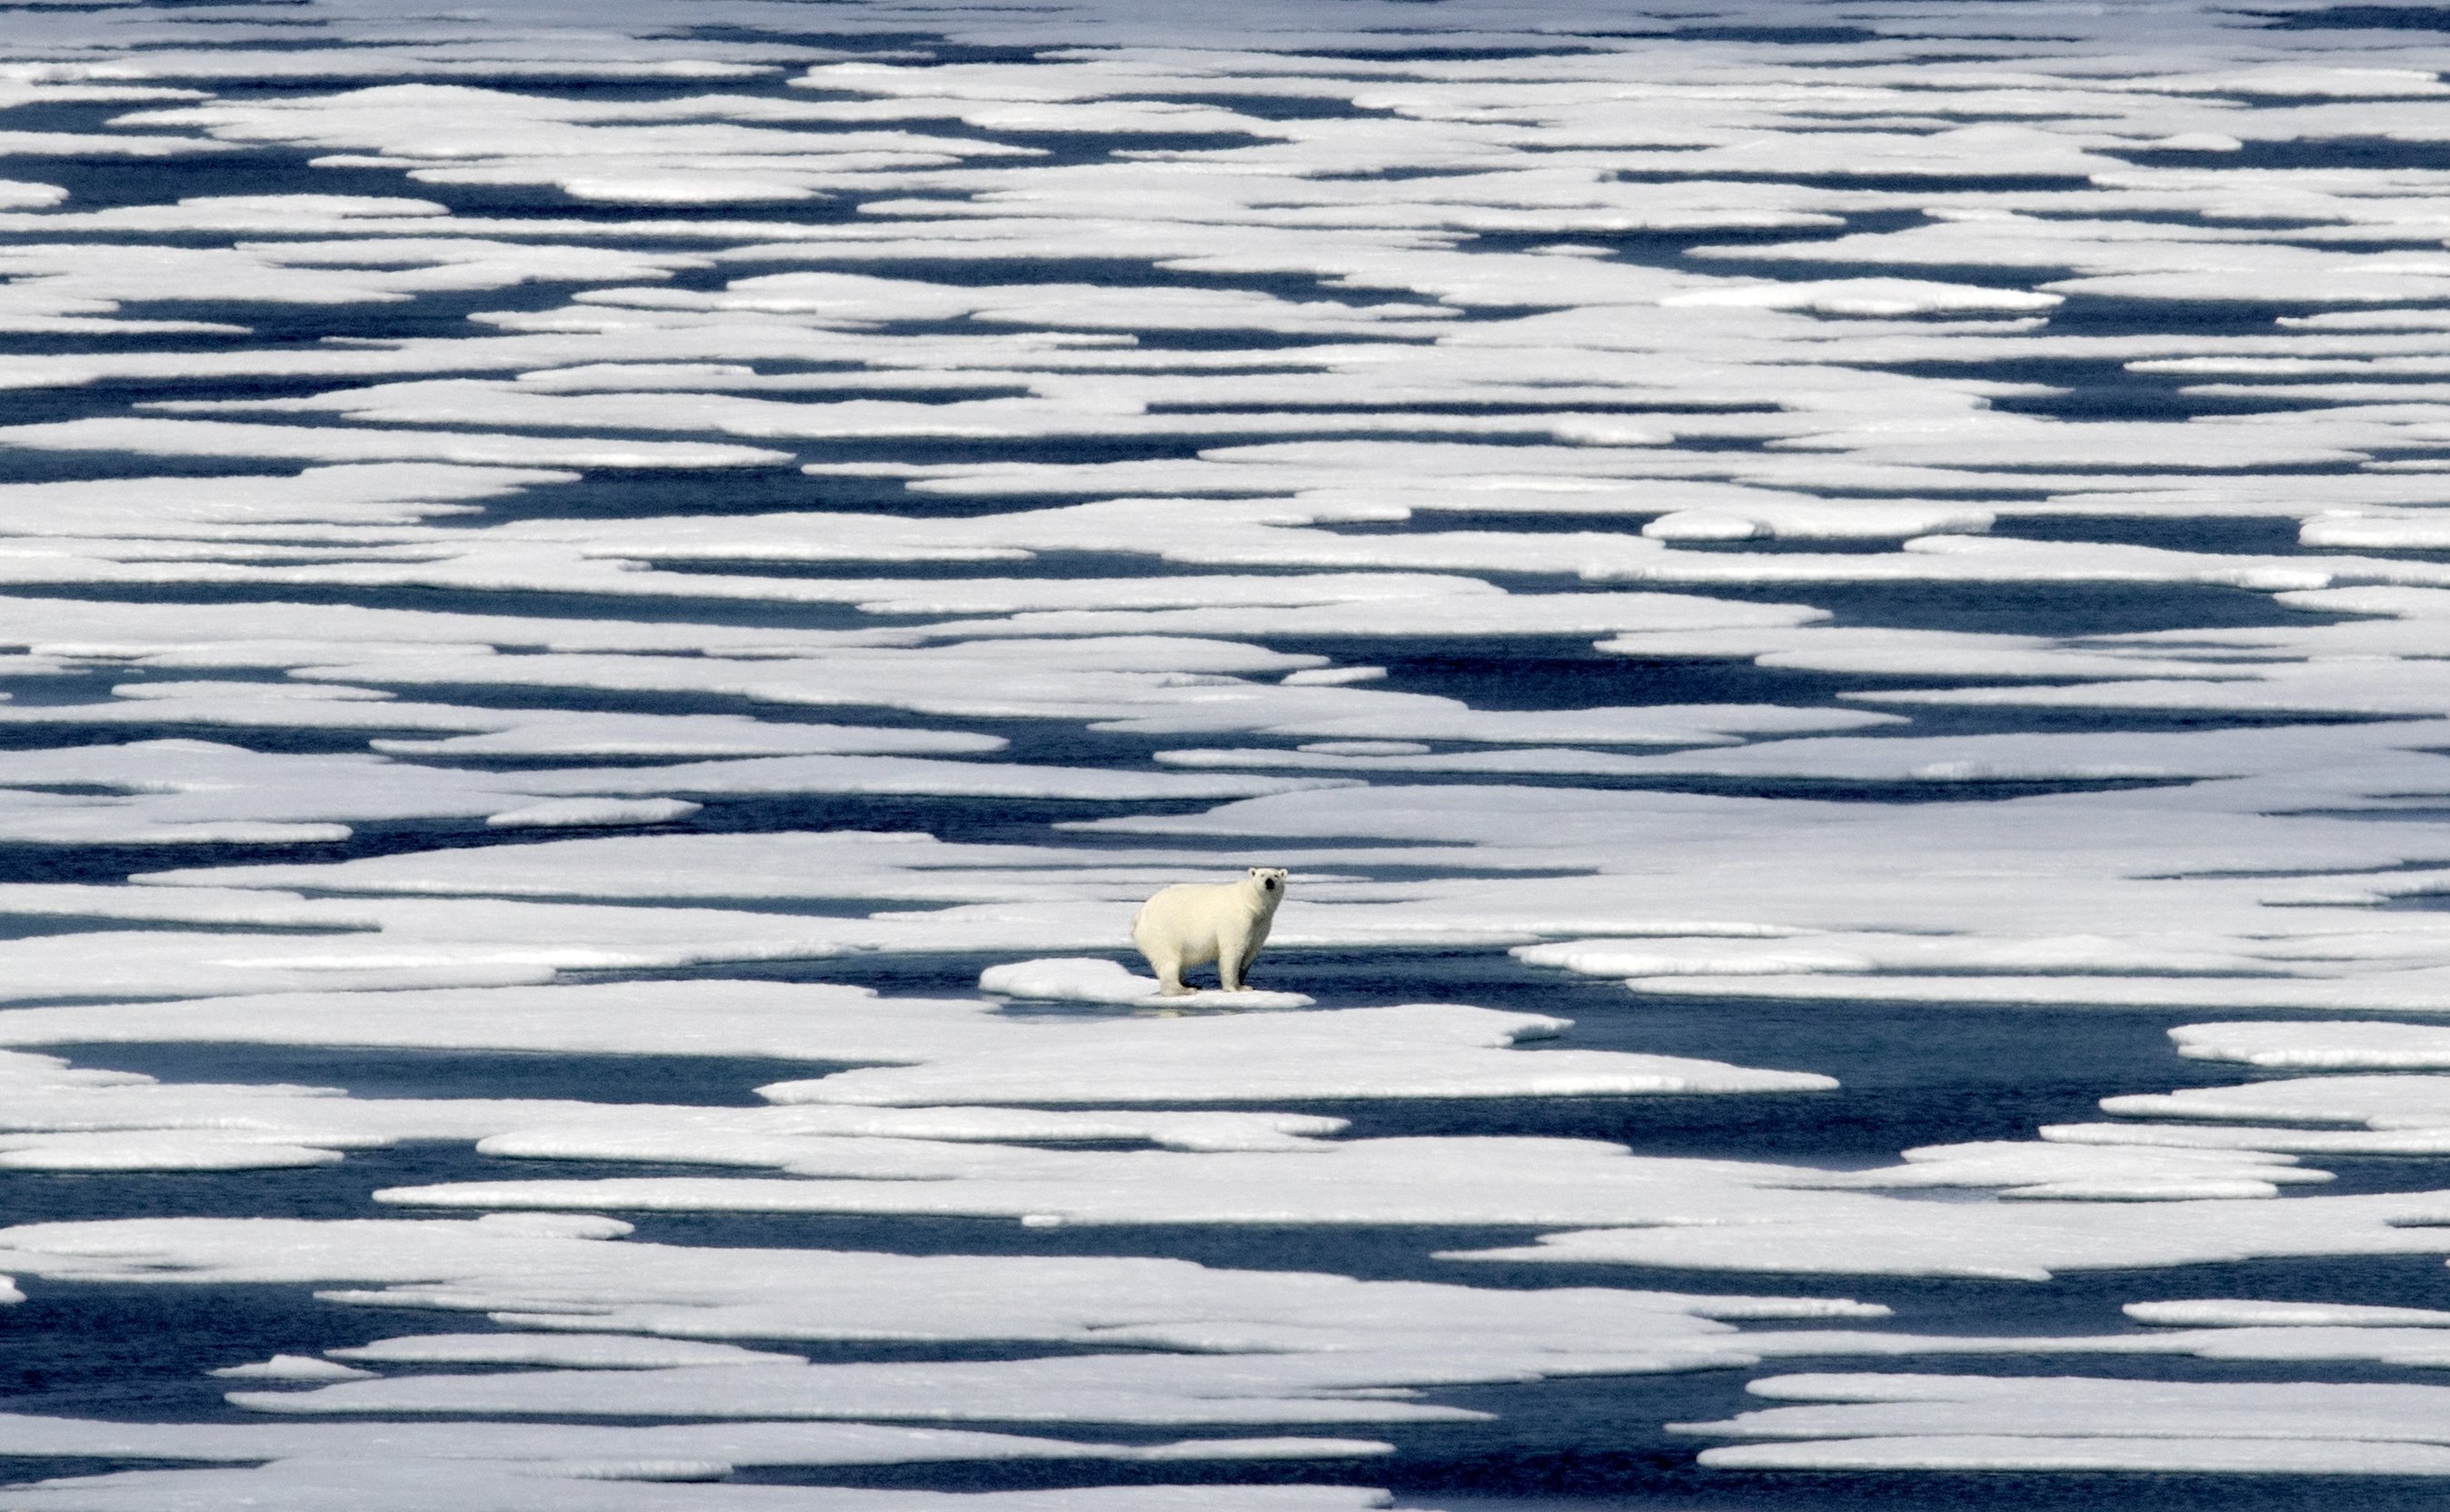 In this July 22, 2017, file photo, a polar bear stands on the ice in the Franklin Strait in the Canadian Arctic Archipelago. (AP Photo)